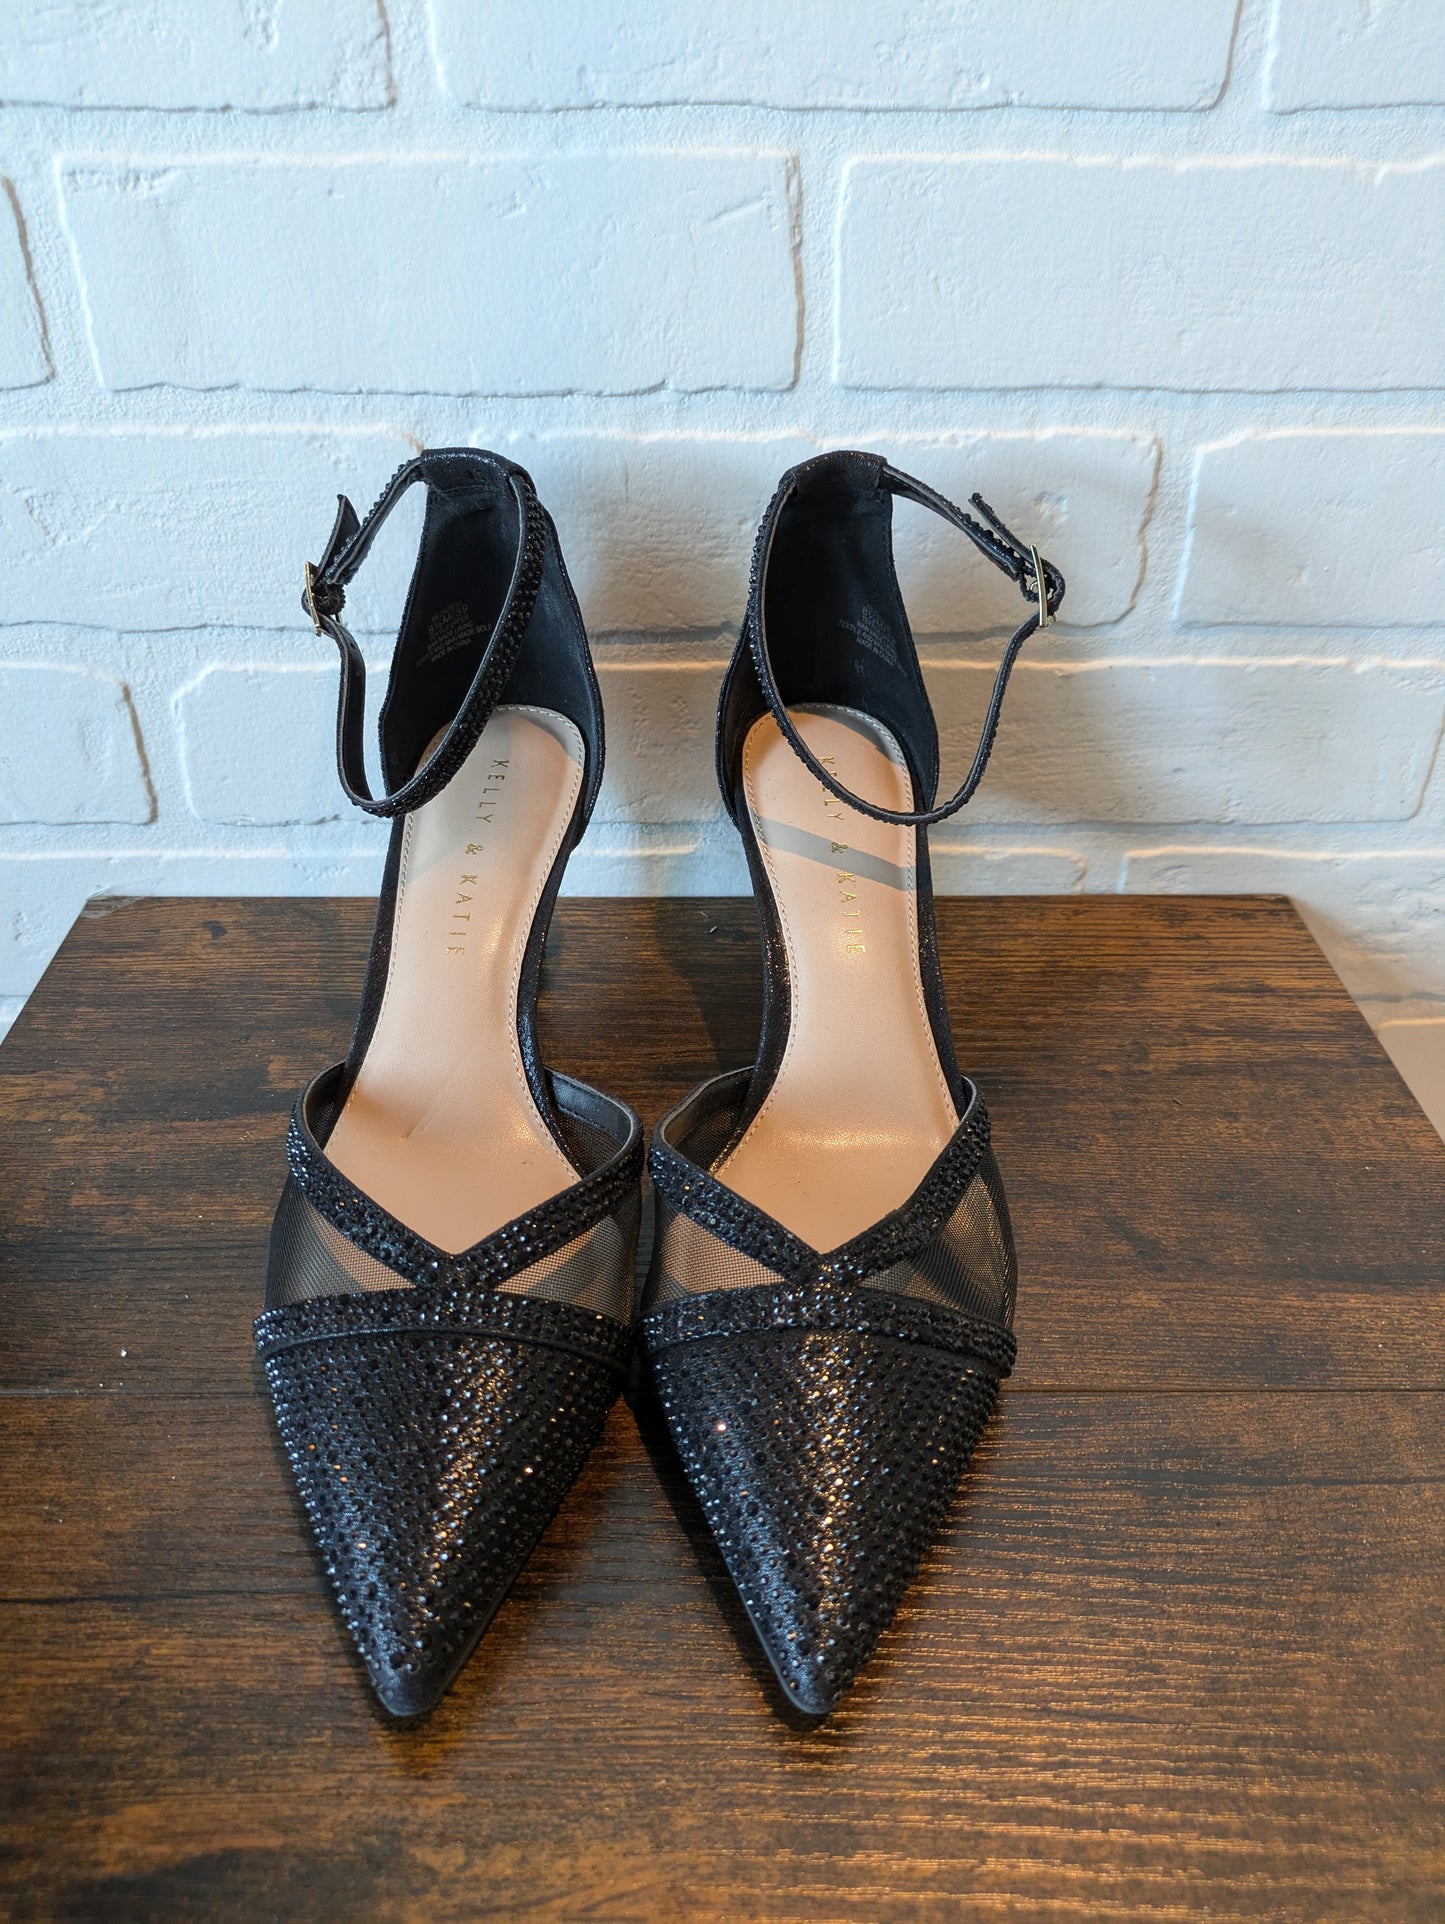 Black Shoes Heels Stiletto Kelly And Katie, Size 8.5